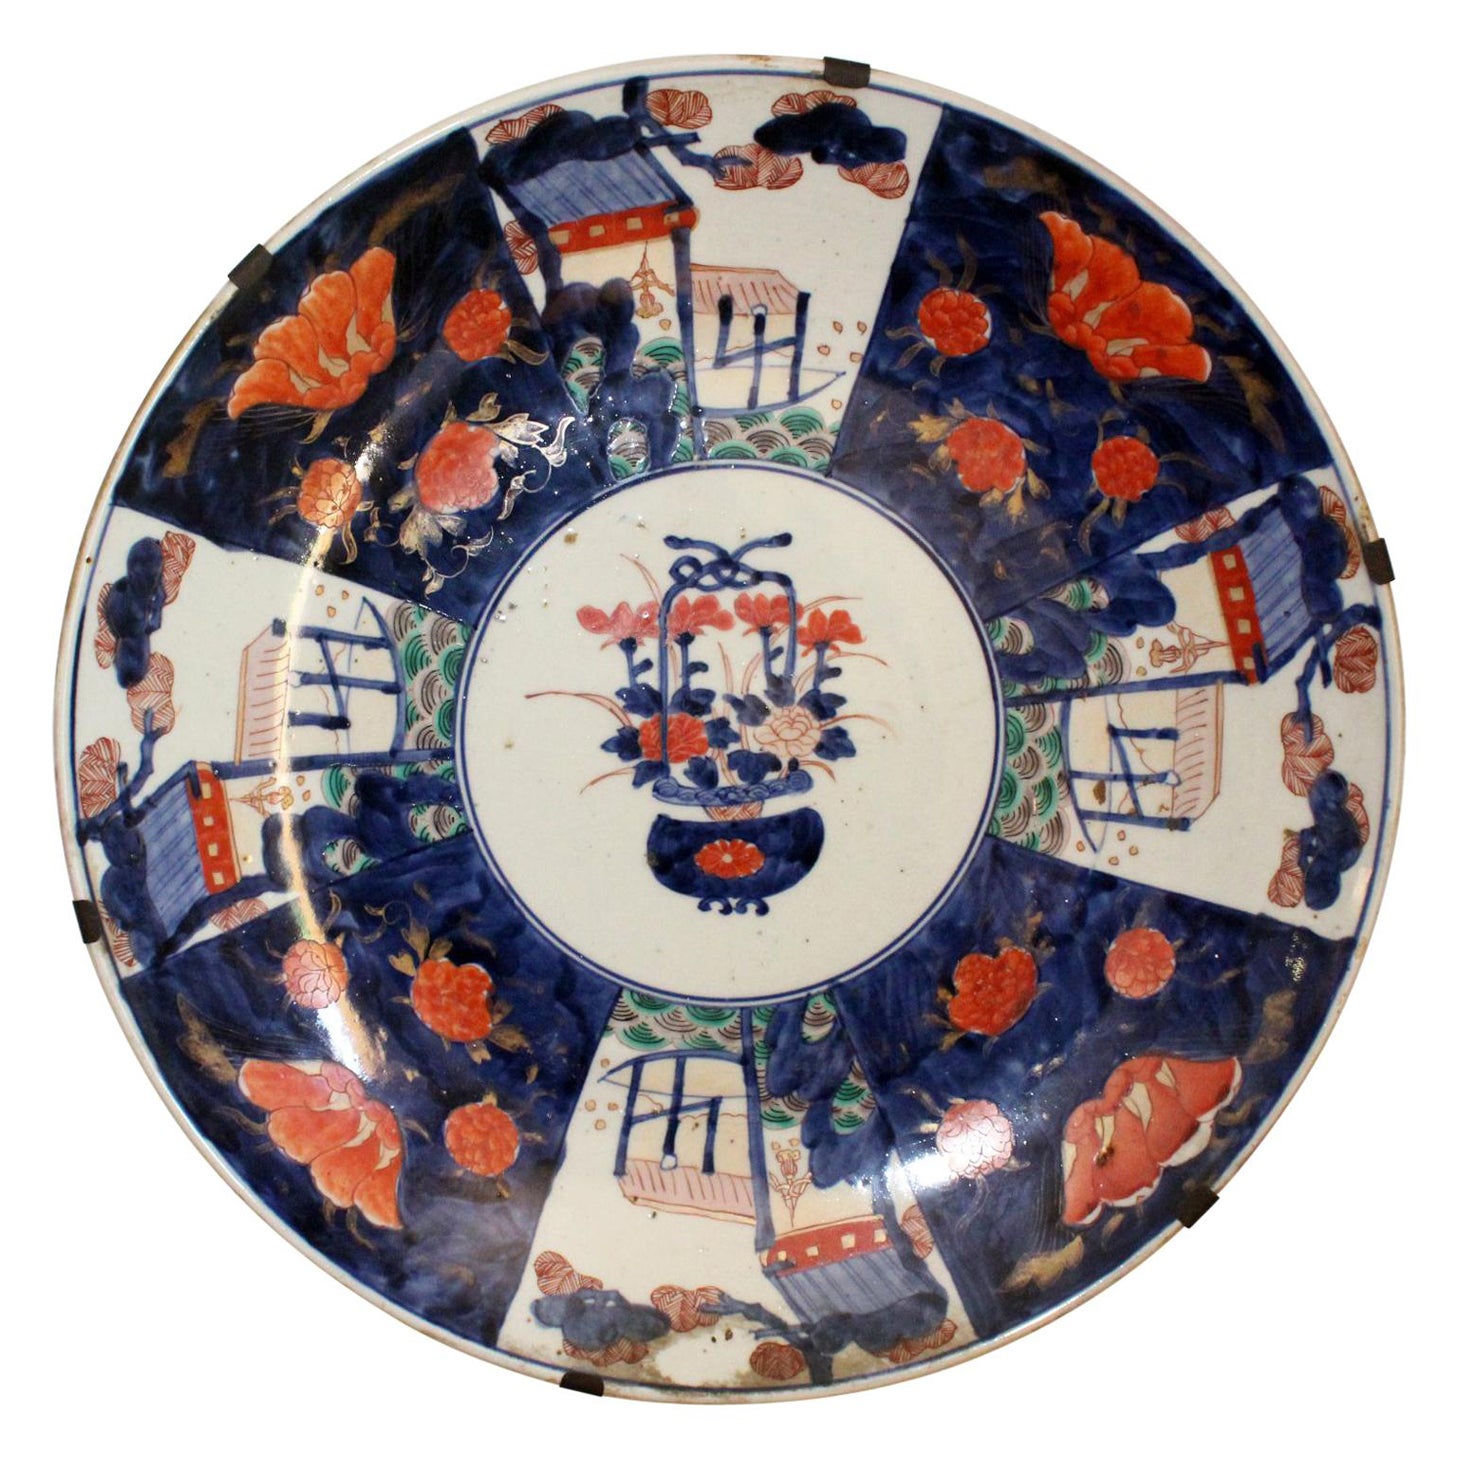 19th Century Japanese Imari Ware Porcelain Plate Hand Painted with Flower Motifs